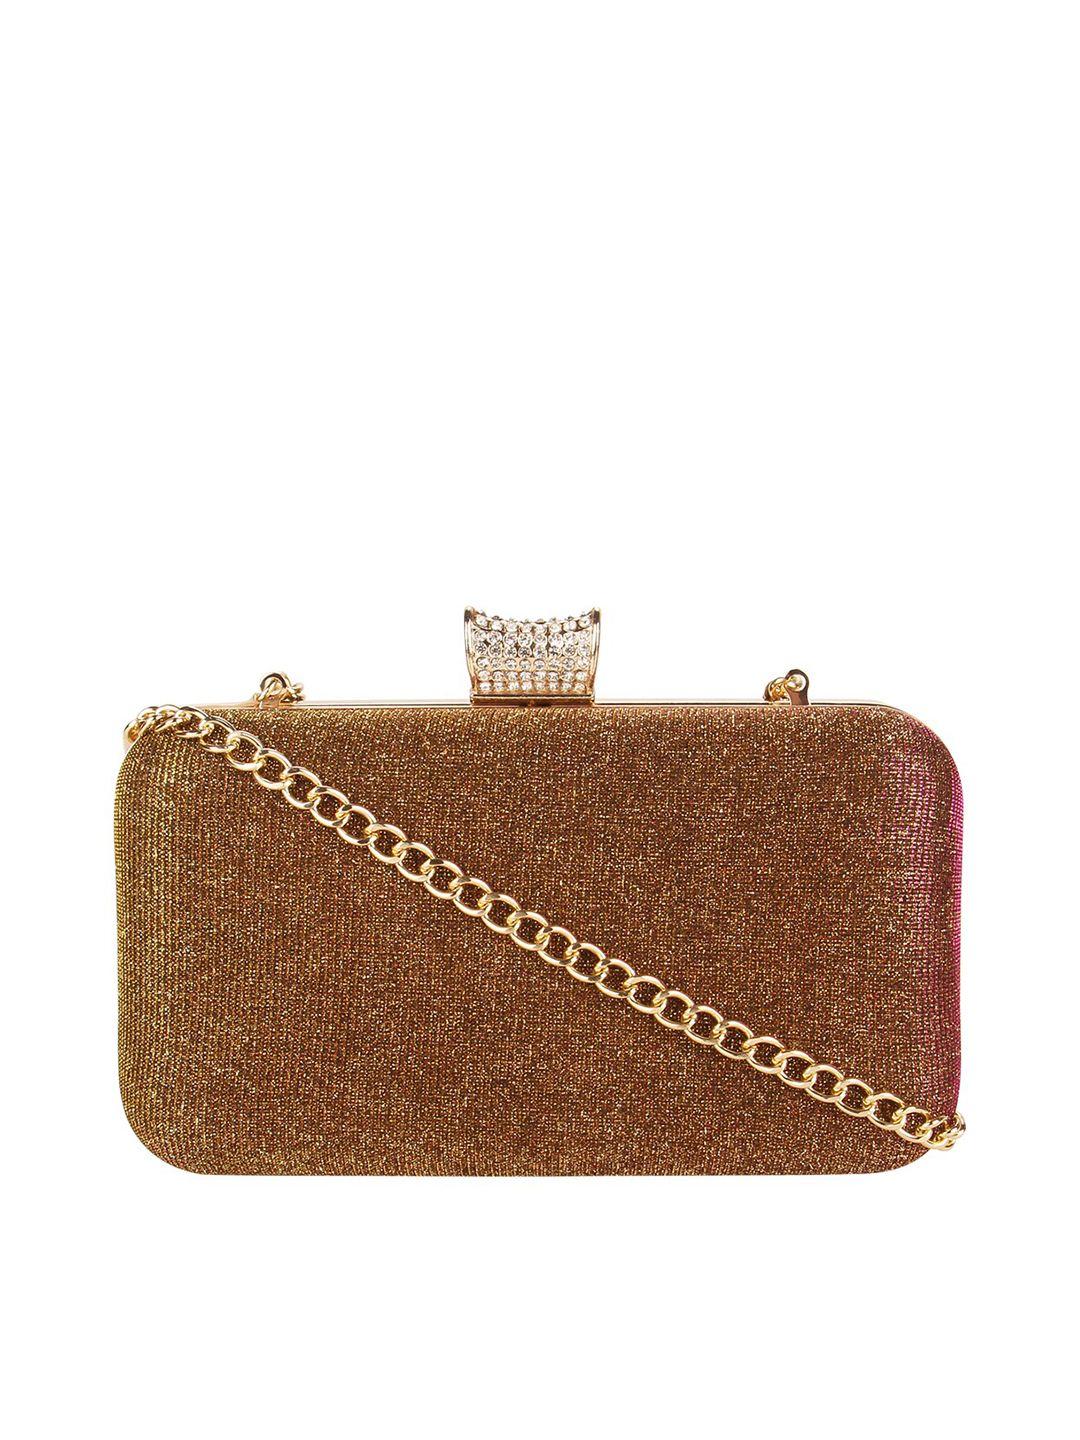 vdesi women gold-toned shimmer box clutch